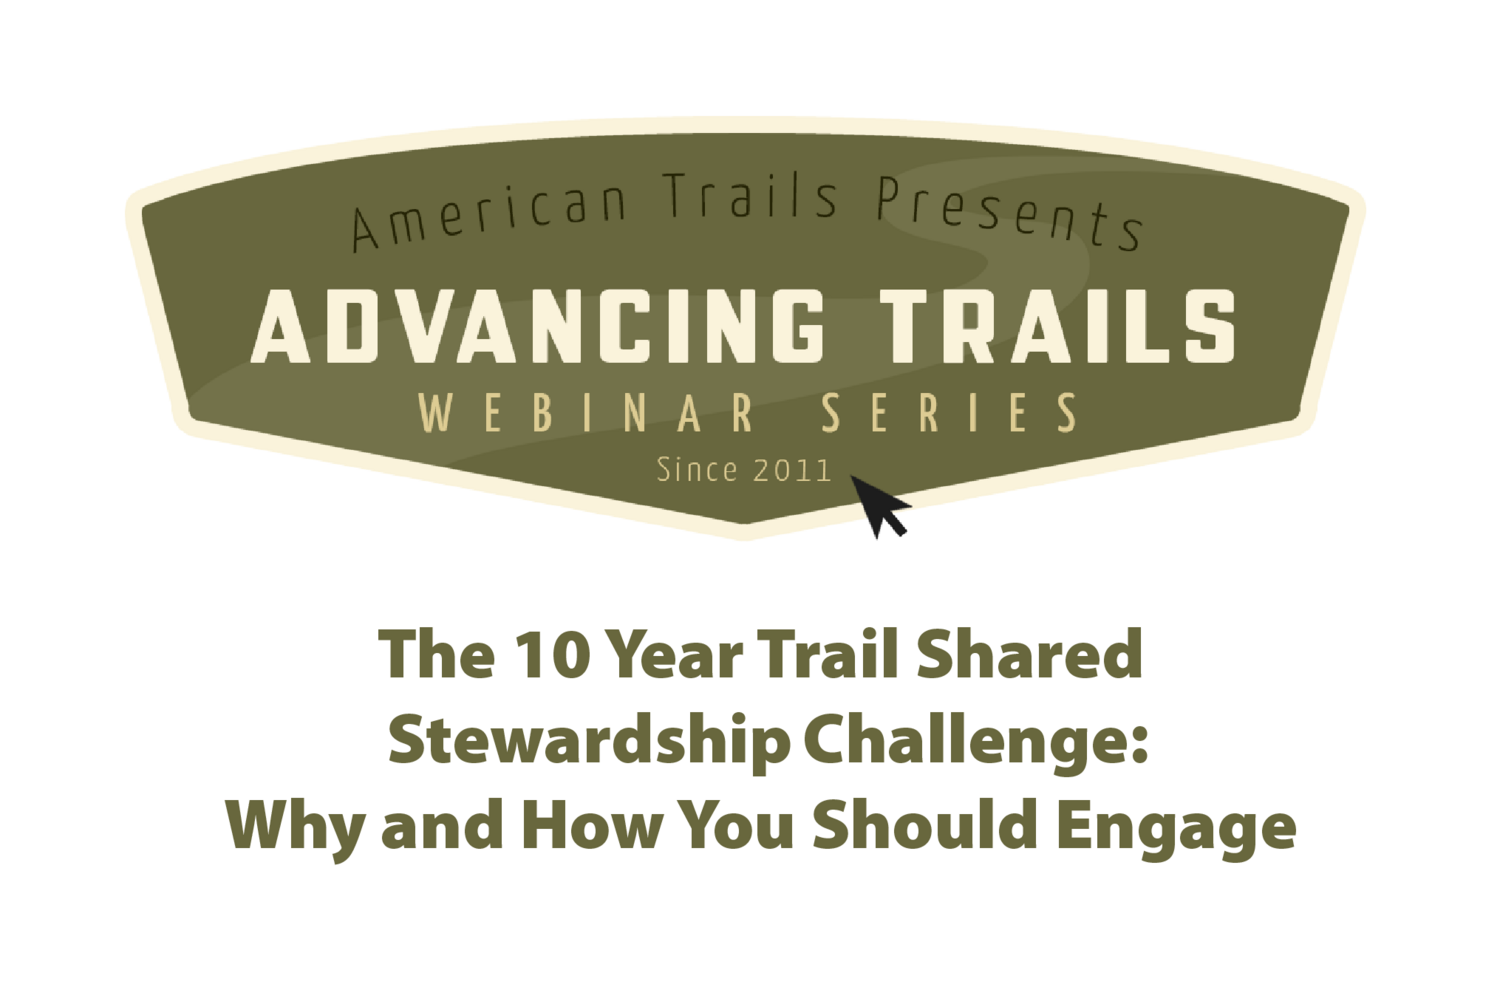 The 10 Year Trail Shared Stewardship Challenge:
Why and How You Should Engage (RECORDING)